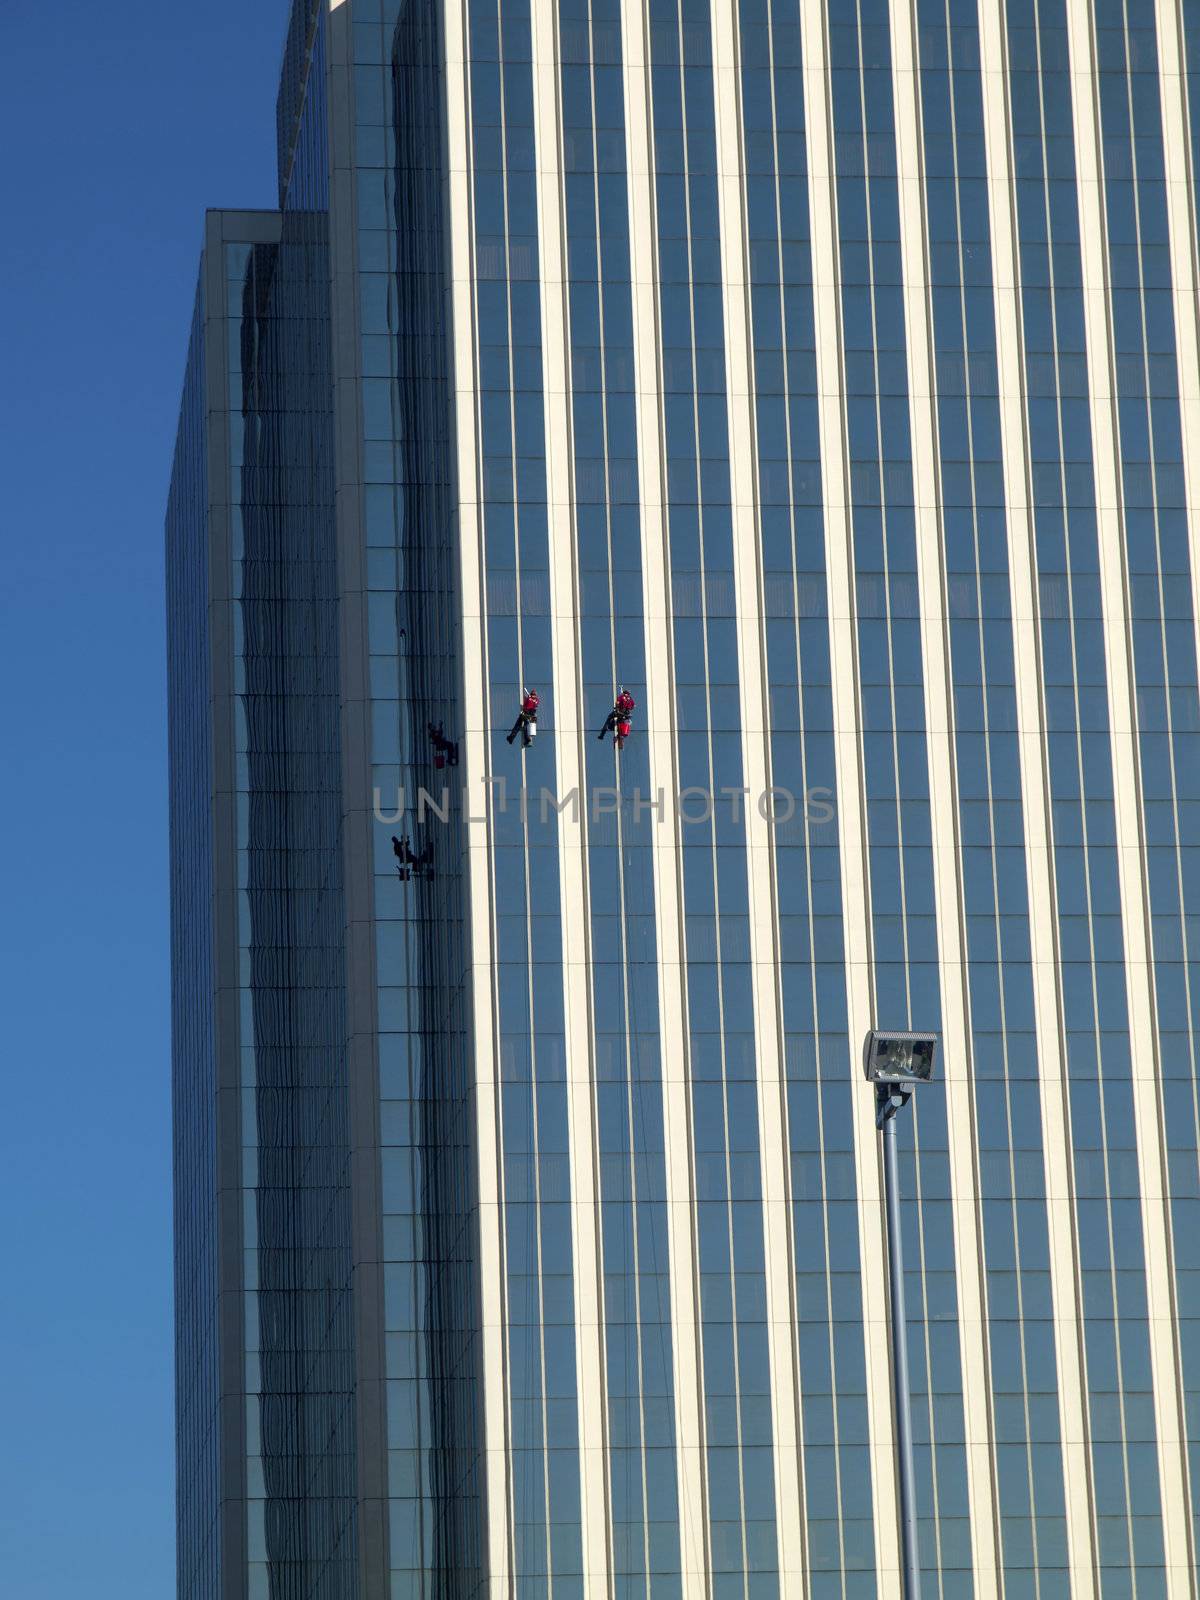 Window washers on a high rise building, Portland OR.